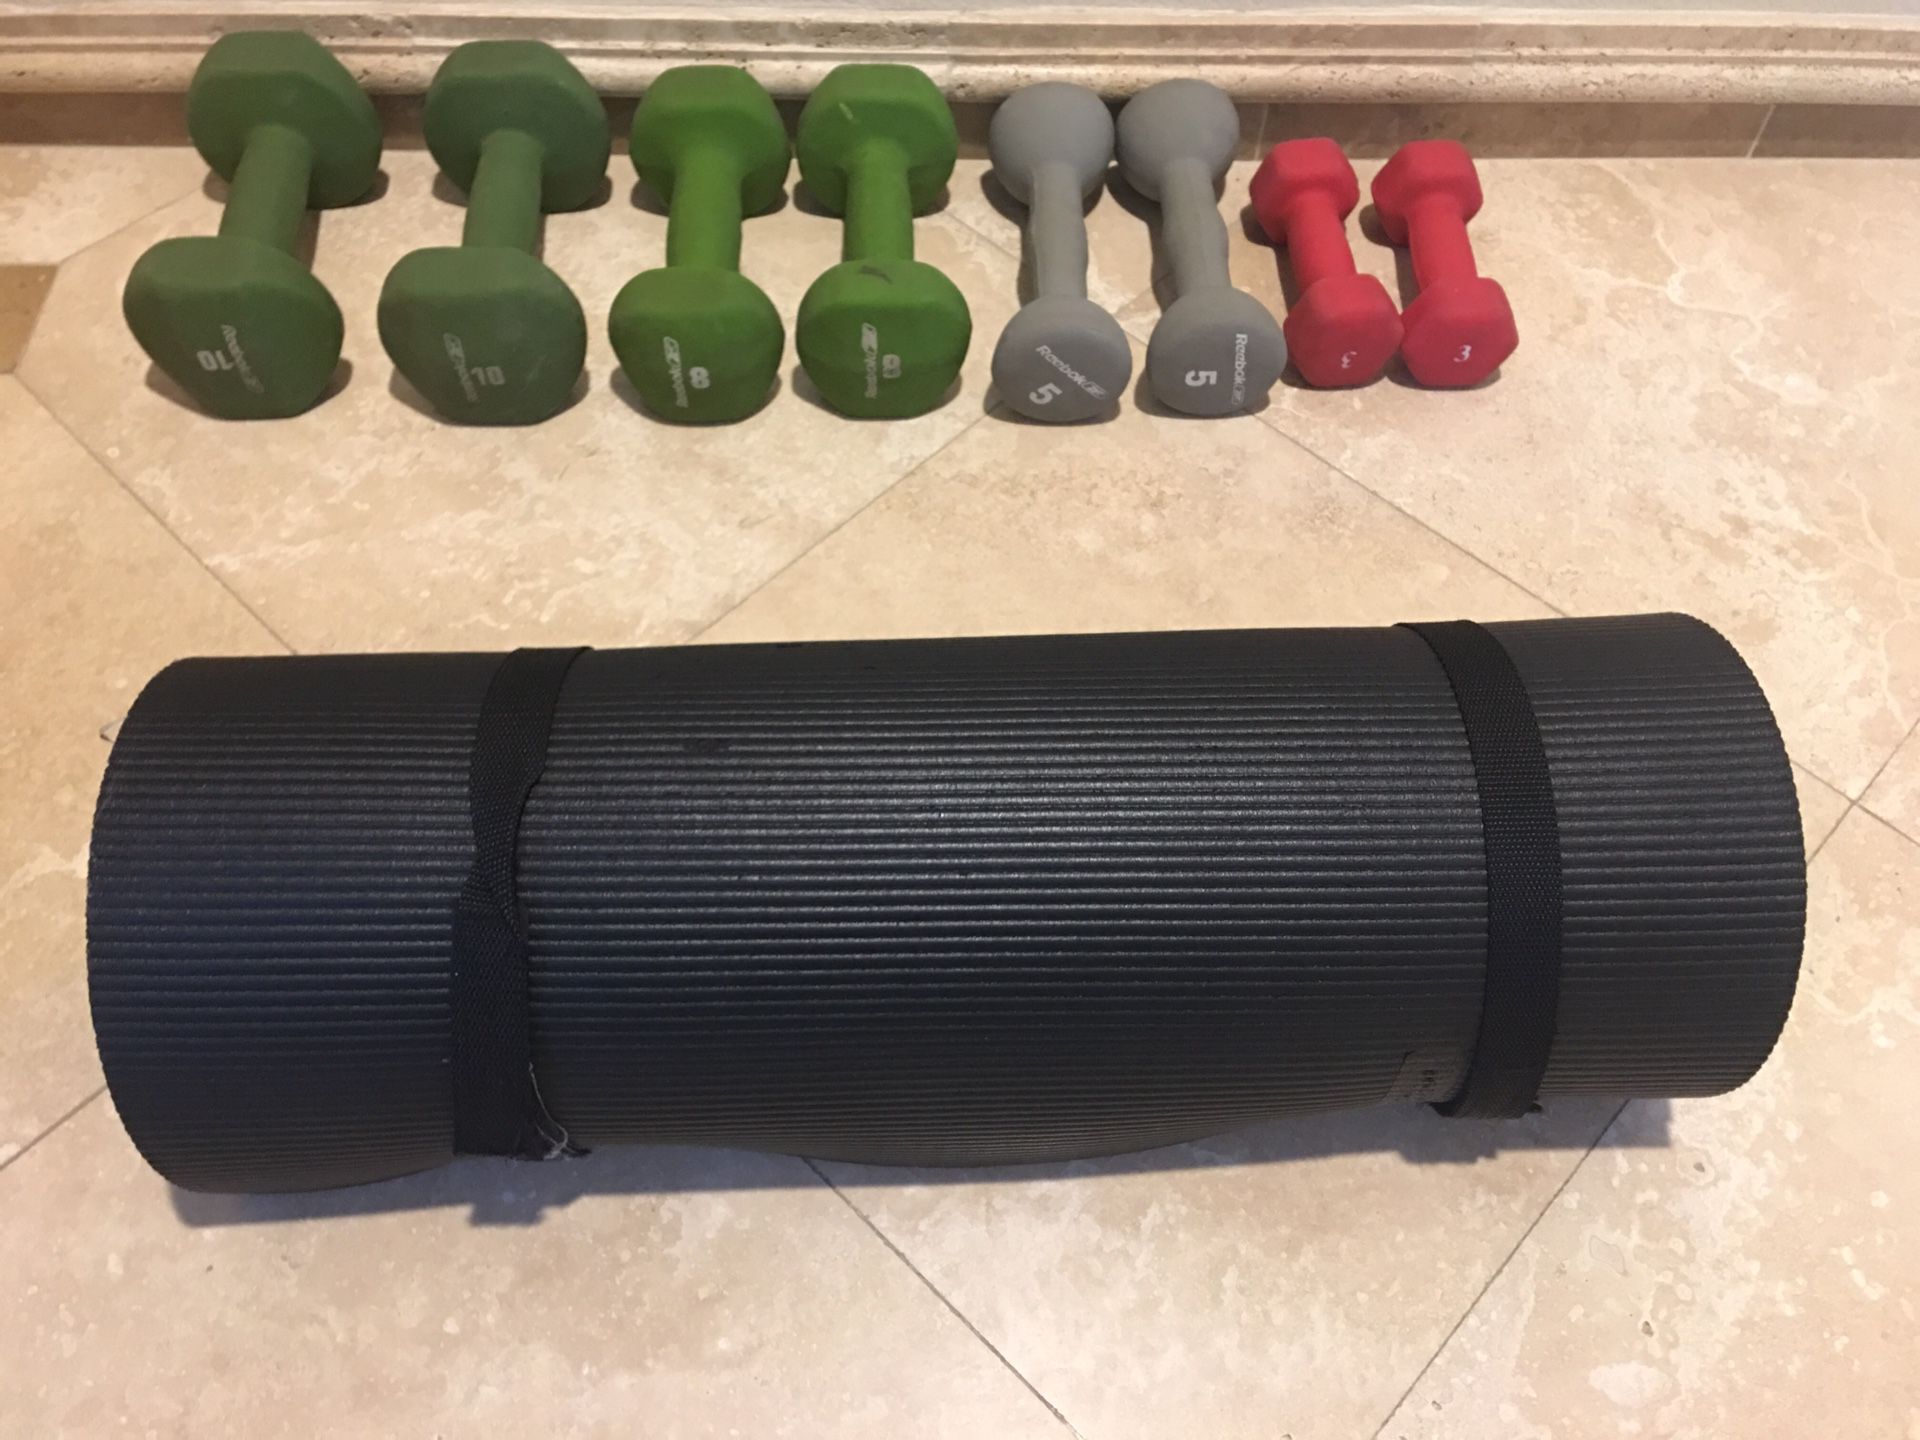 Set of weights and exercise mat